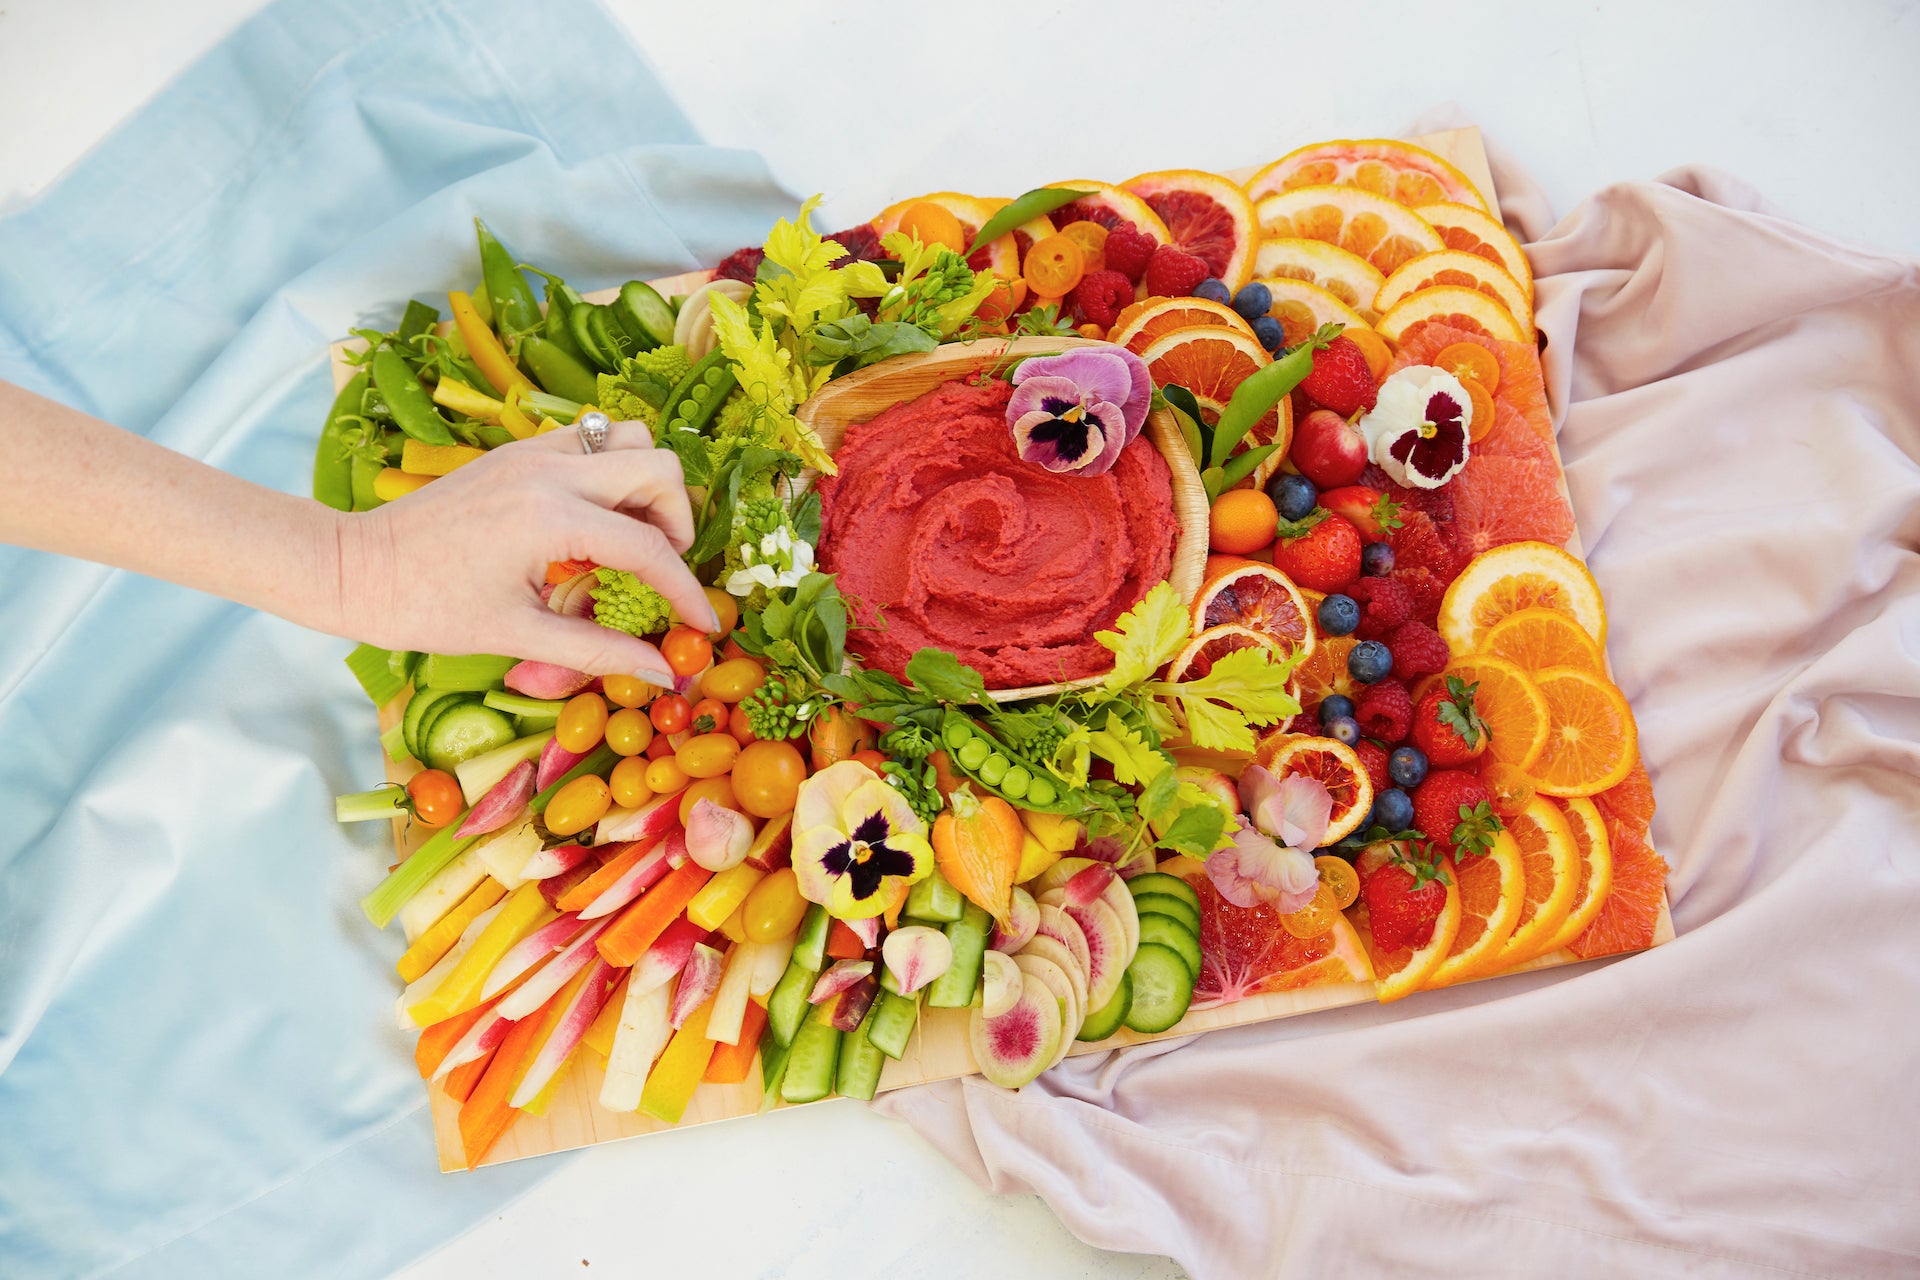 Rainbow fruit and vegetable charcuterie board.